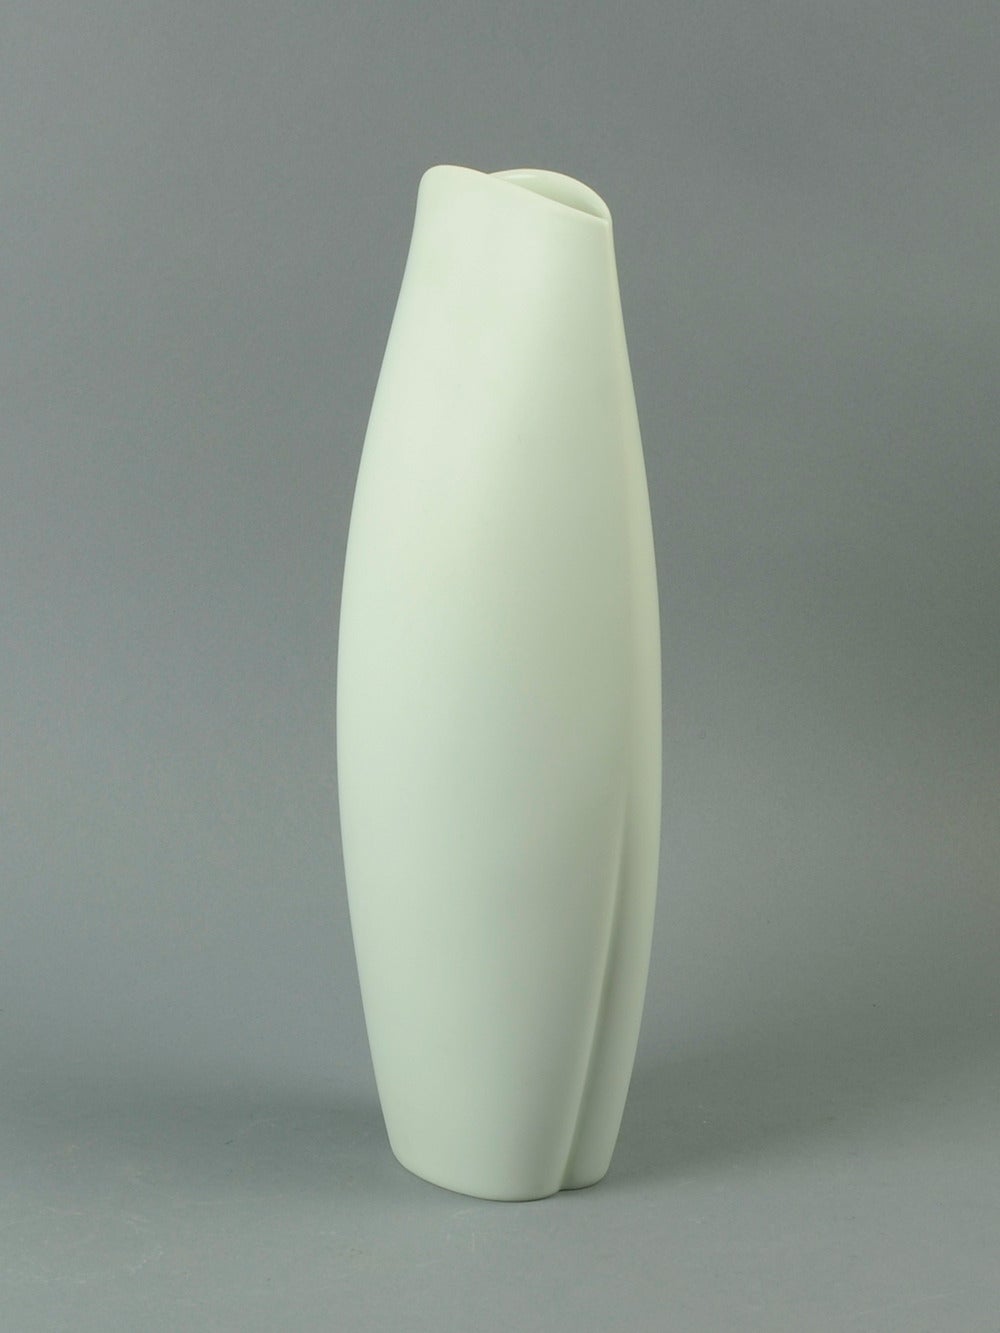 Available separately or as a group. 

1. Porcelain vase with matte white glaze, 1970s.
Height 12 1/2